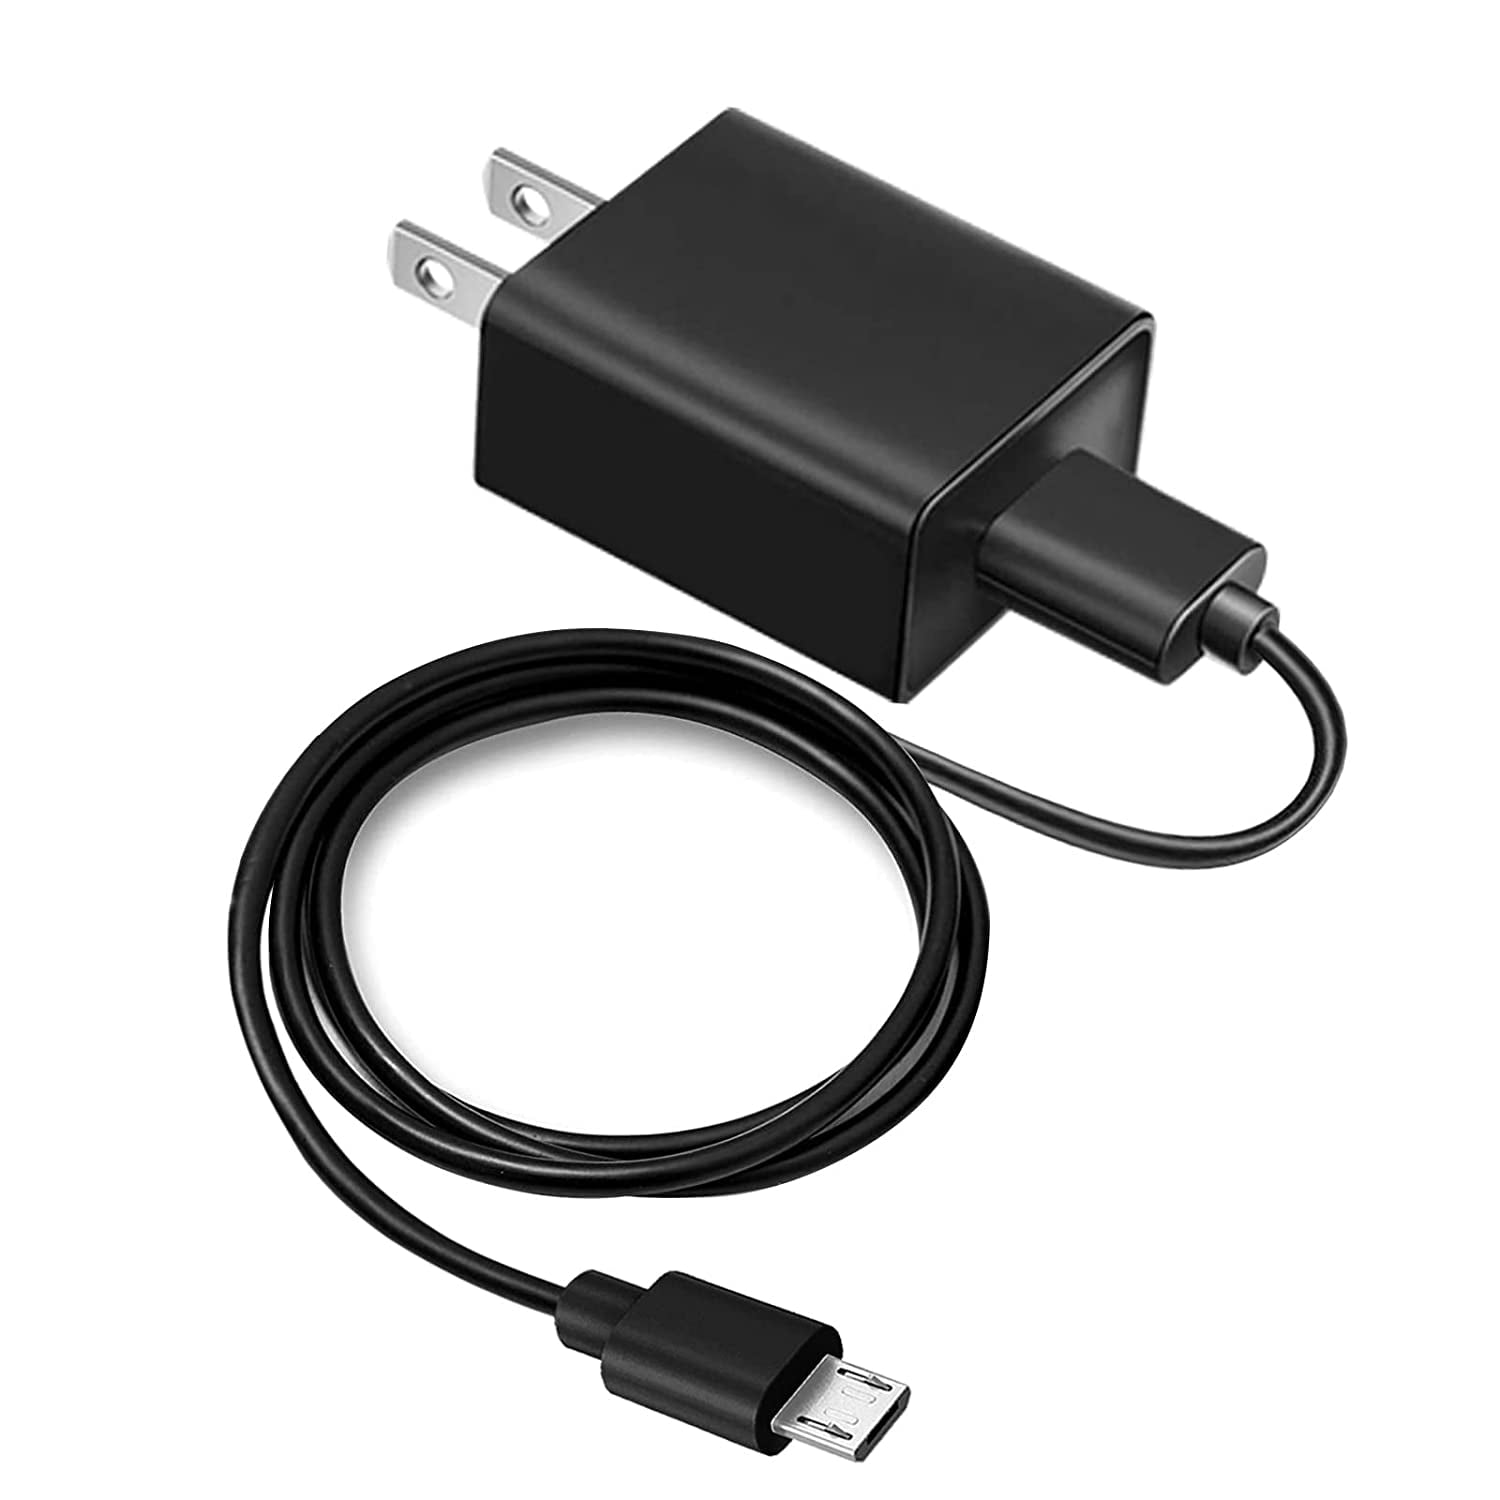 BoxWave Charger for Freestyle Libre Reader (Charger by BoxWave) - Wall  Charger Direct, Wall Plug Charger for Freestyle Libre Reader, Freestyle  Libre